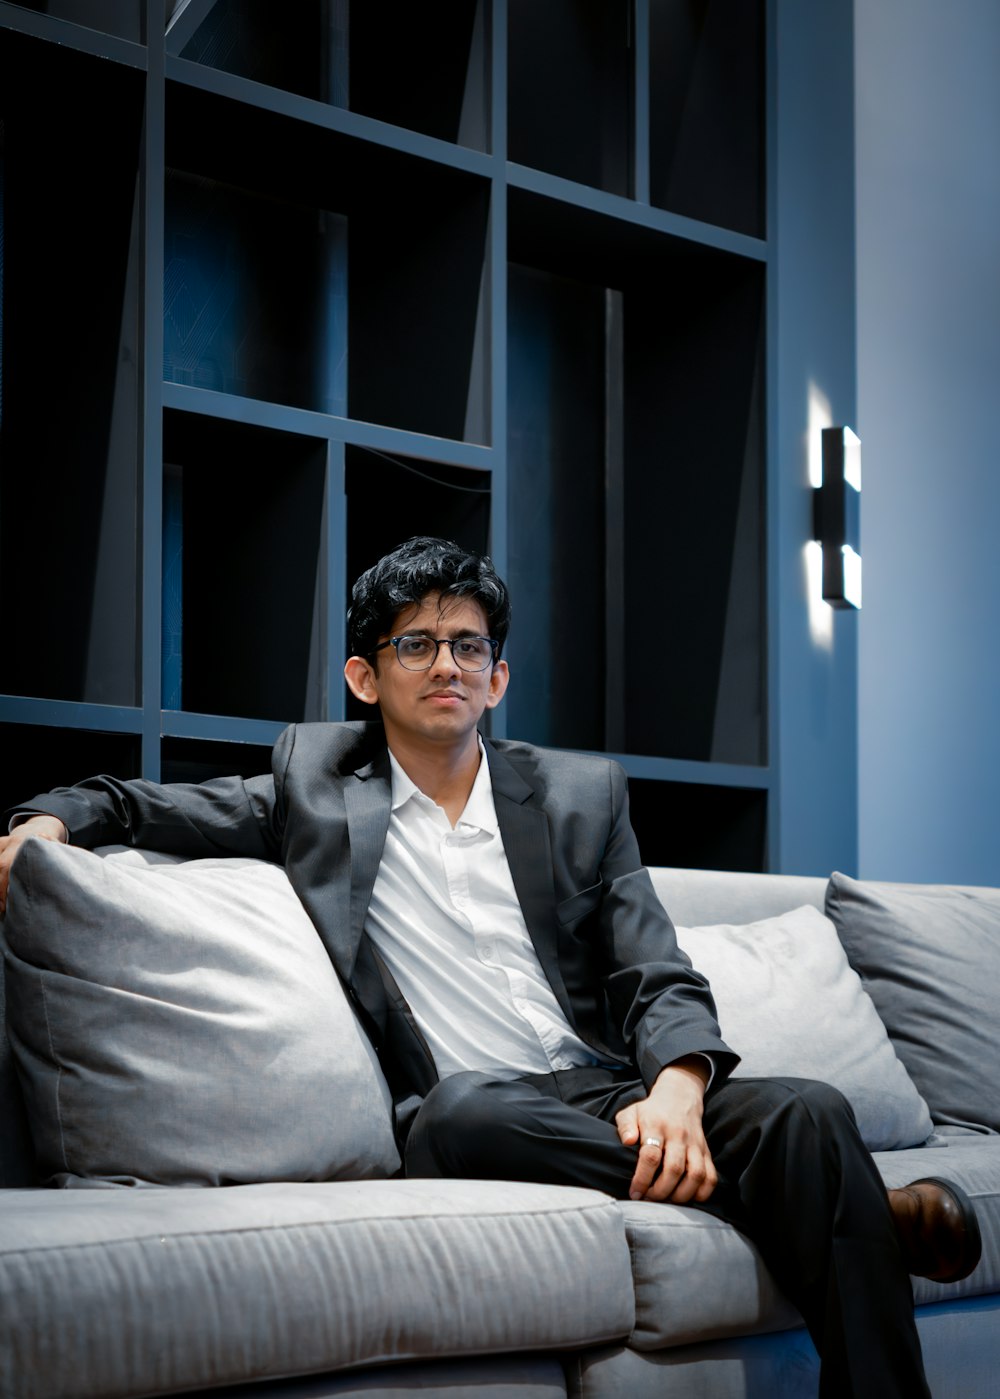 a man in a suit sitting on a couch